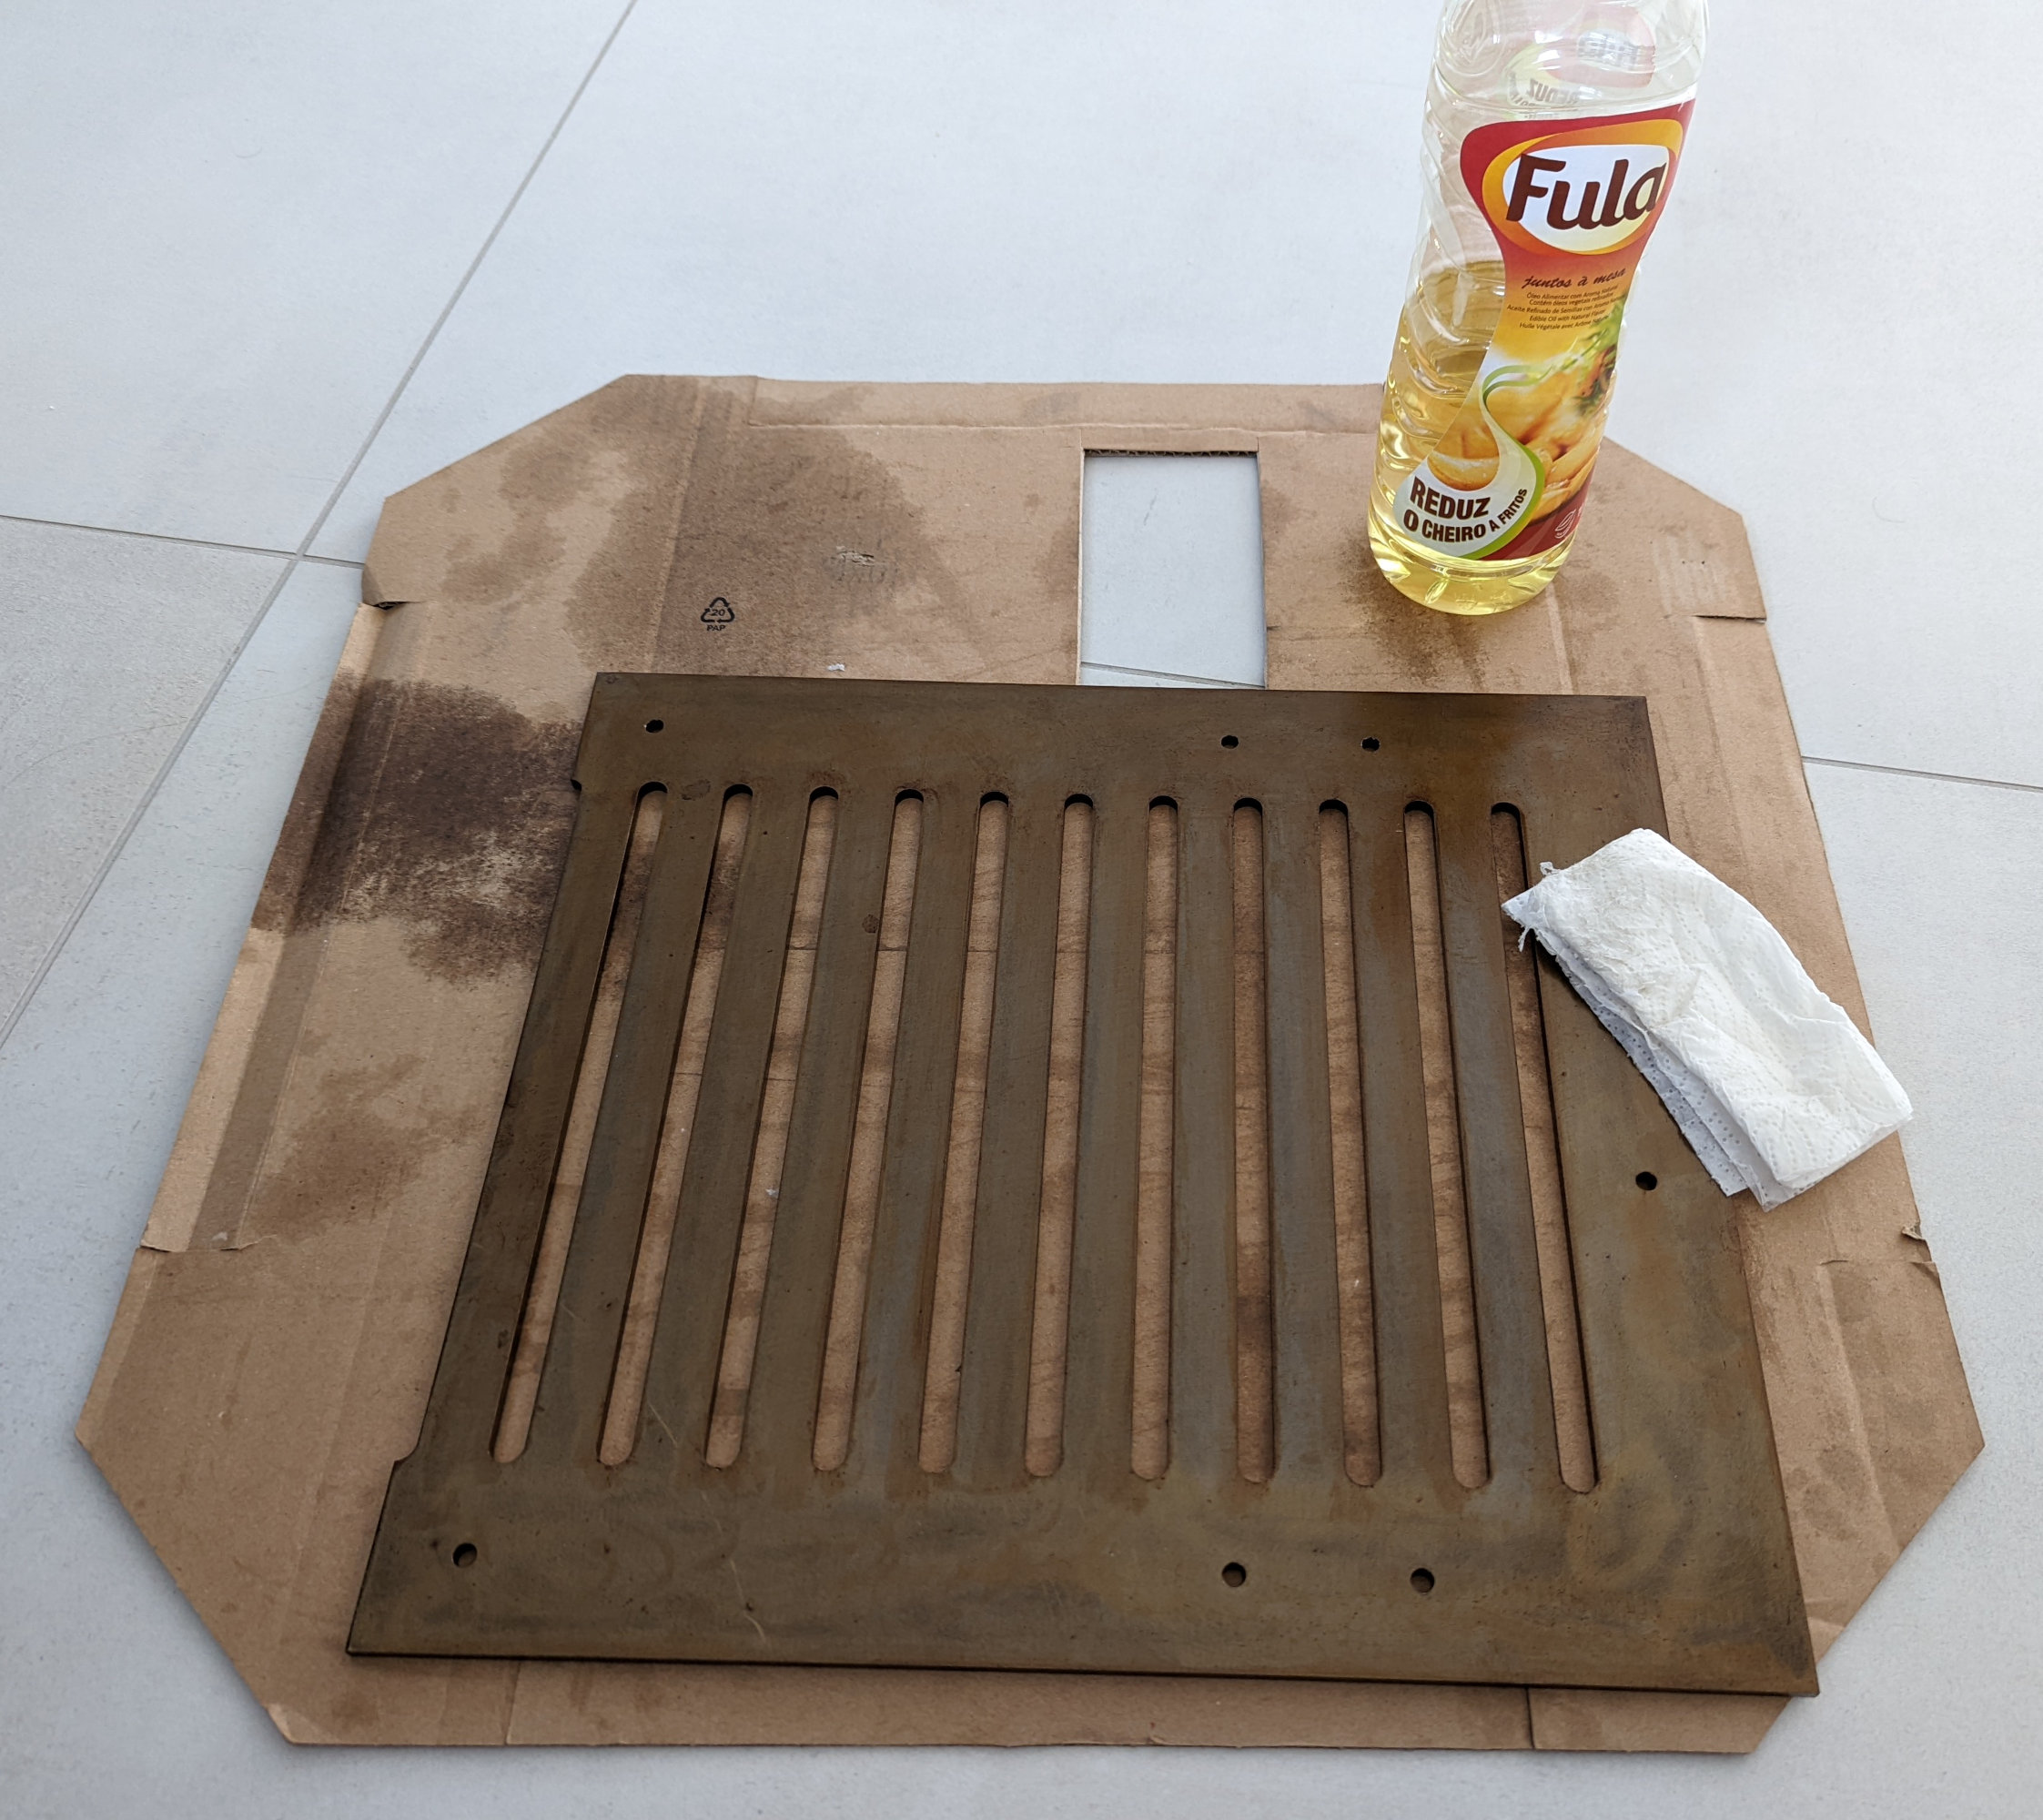 A steel grate sitting on a protective cardboard sheet with an oil soaked paper towel on top.